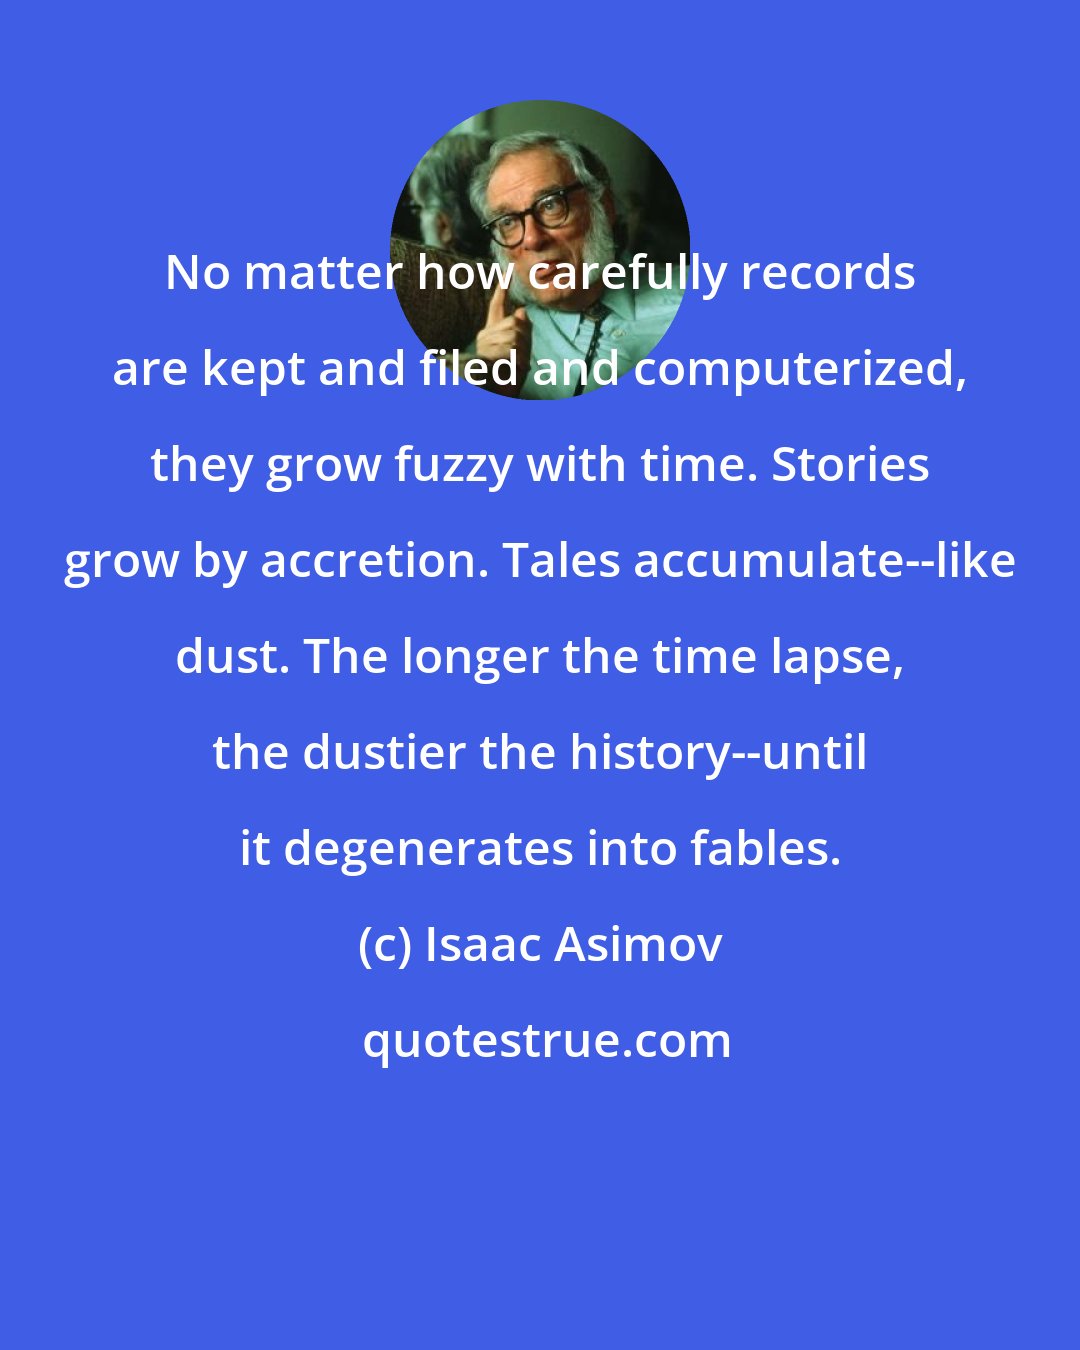 Isaac Asimov: No matter how carefully records are kept and filed and computerized, they grow fuzzy with time. Stories grow by accretion. Tales accumulate--like dust. The longer the time lapse, the dustier the history--until it degenerates into fables.